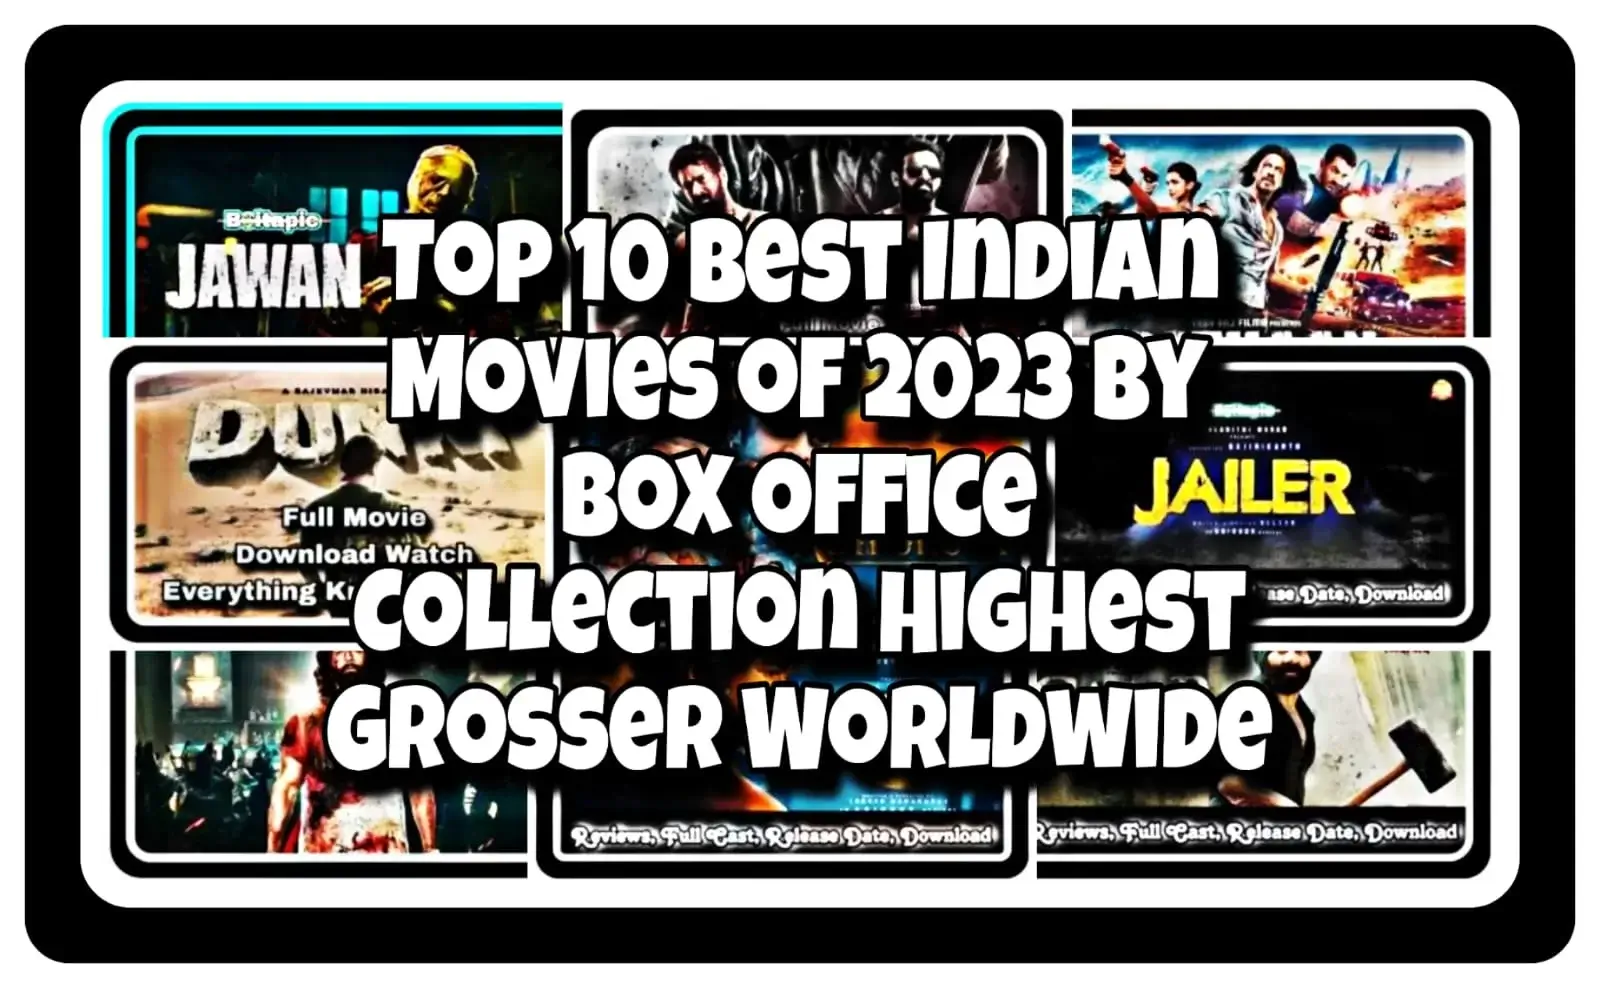 Top Indian Movies of 2023 by Box Office